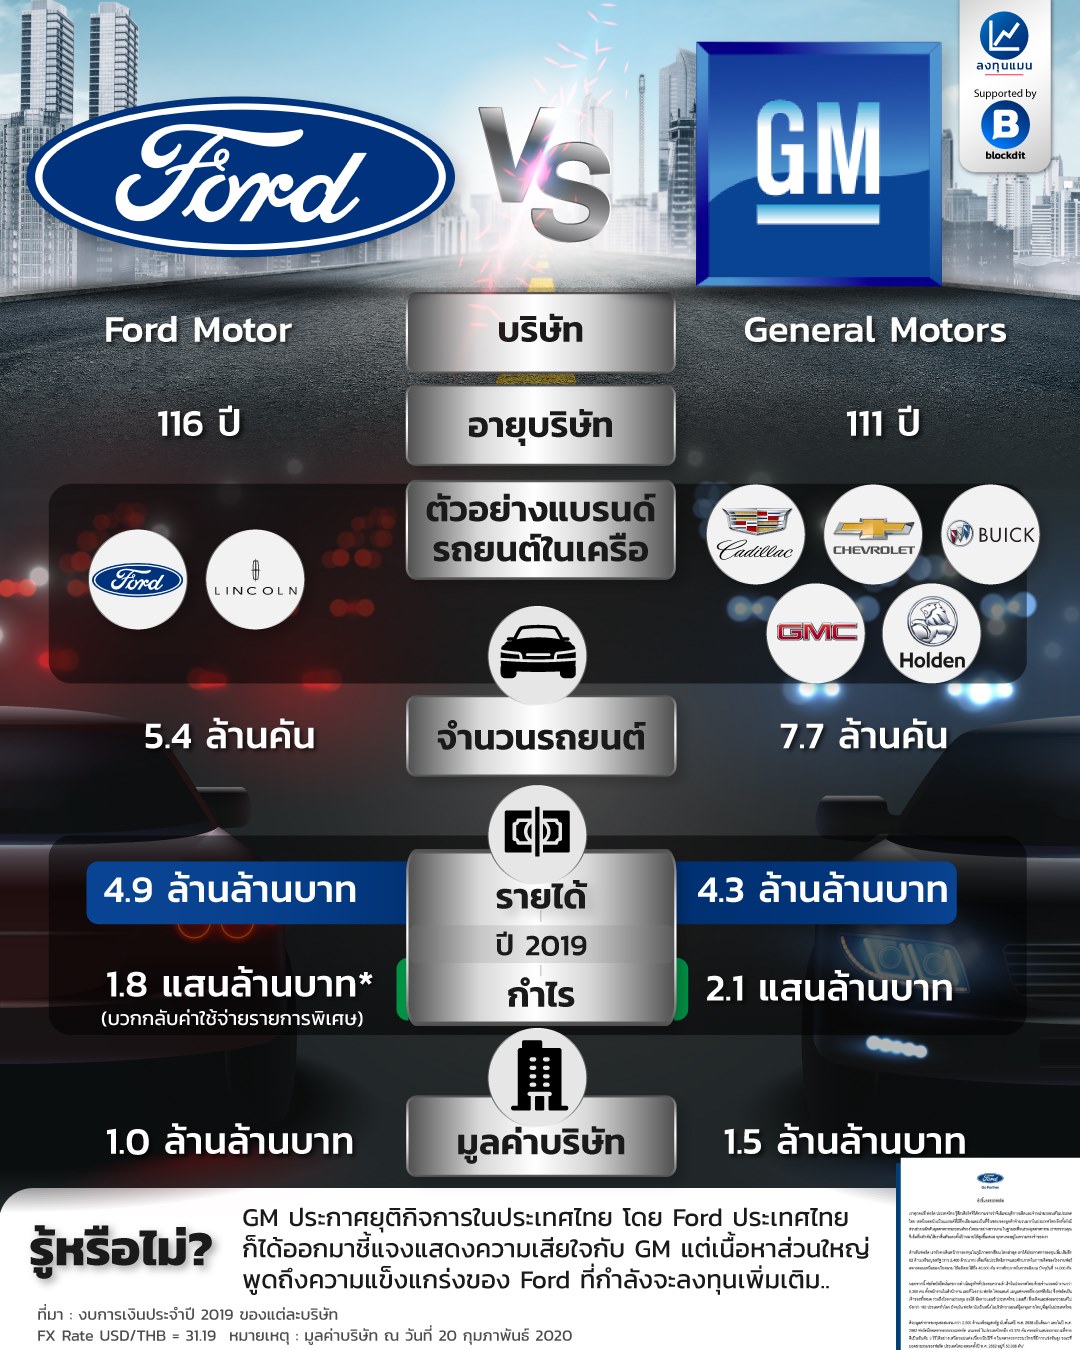 Ford VS GM